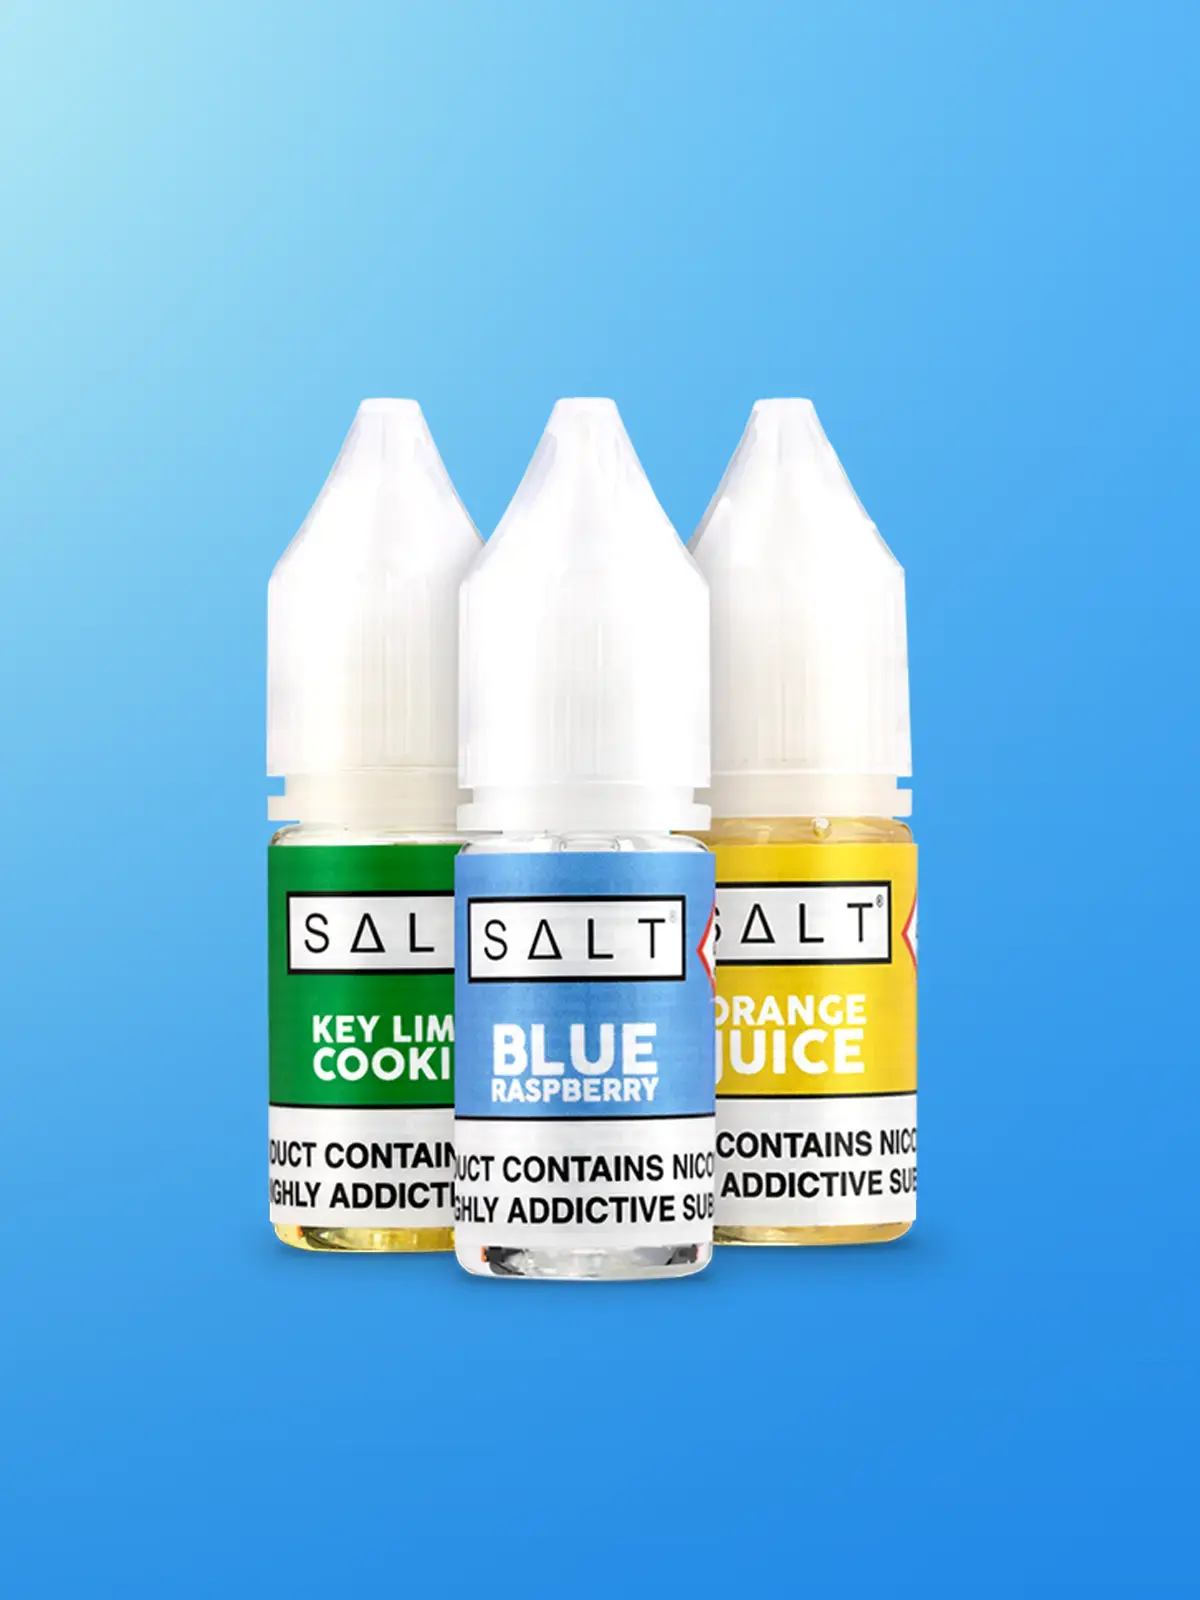 Three bottles of SALT e-liquid; Key Lime Cookie, Blue Raspberry and Orange Juice, standing in front of a blue background